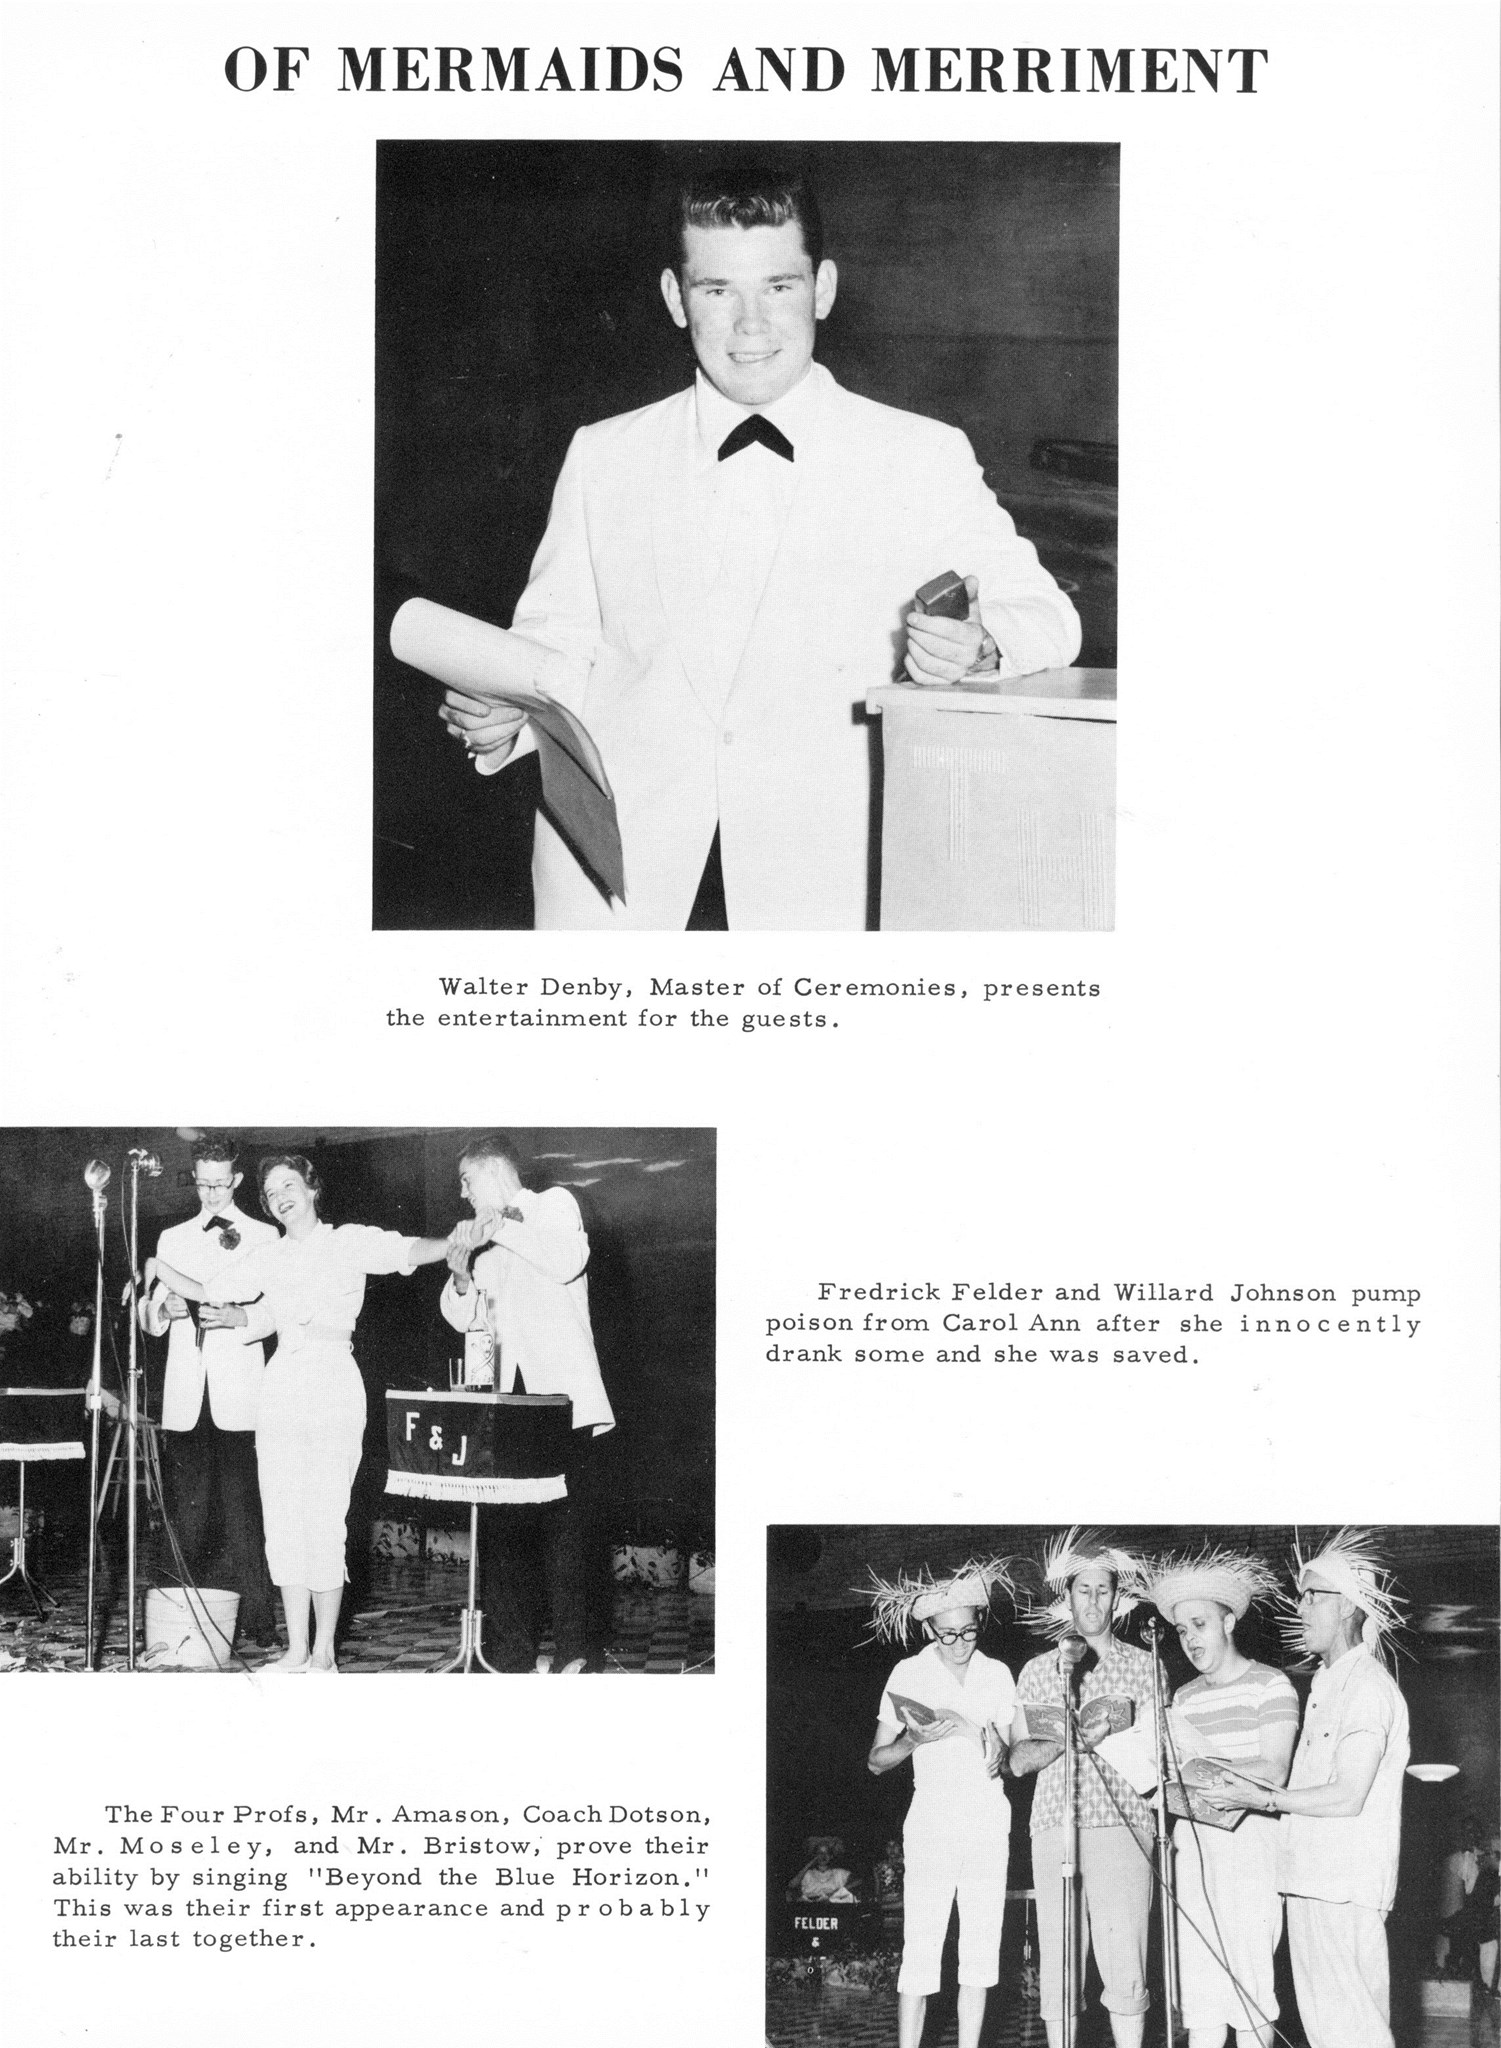 ../../../Images/Large/1959/Arclight-1959-pg0181.jpg